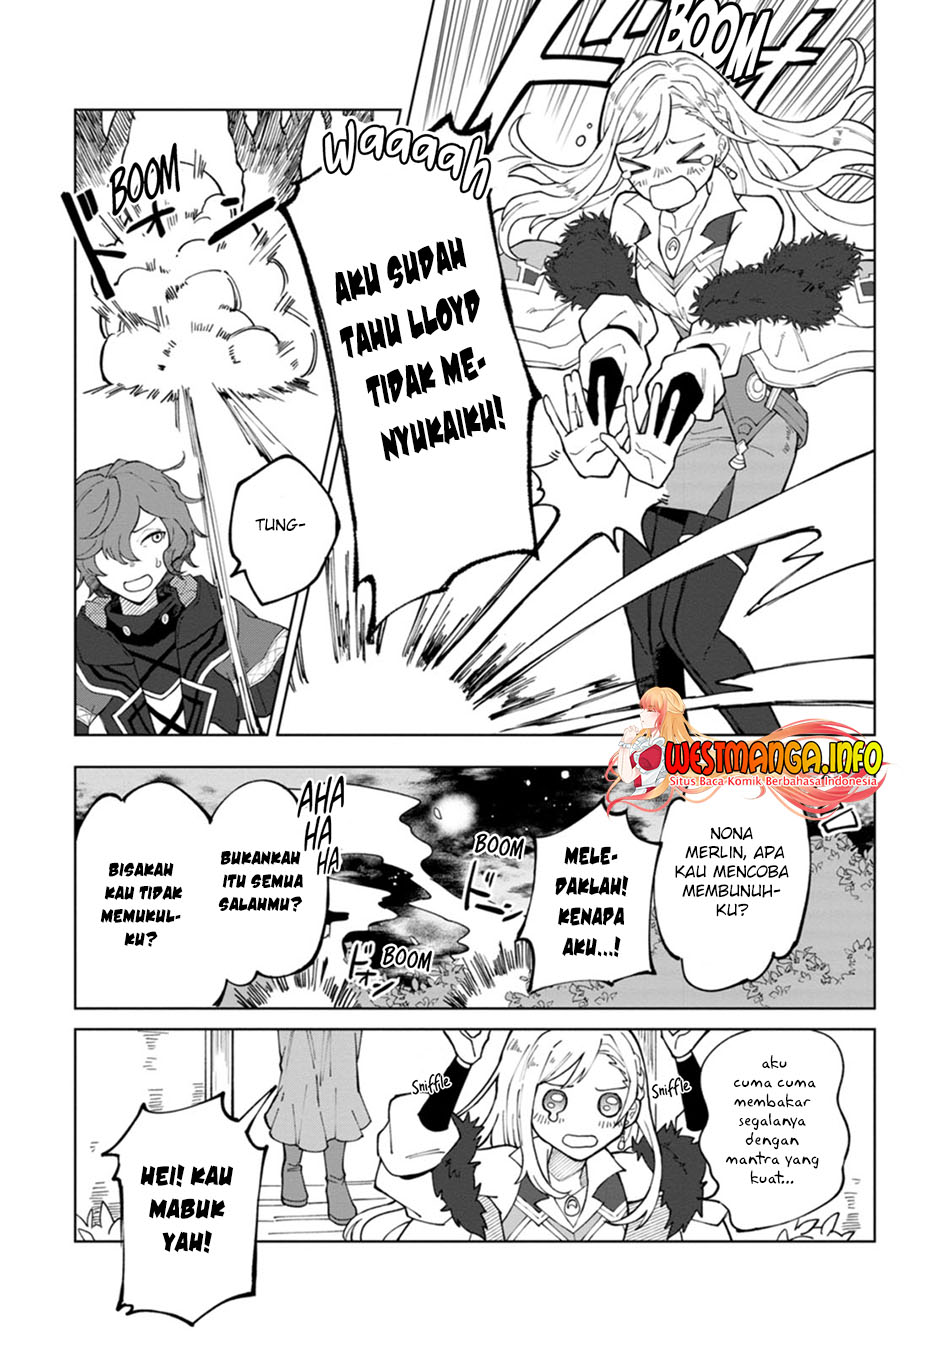 The White Mage Who Was Banished From the Hero’s Party Is Picked up by an S Rank Adventurer ~ This White Mage Is Too Out of the Ordinary! Chapter 10